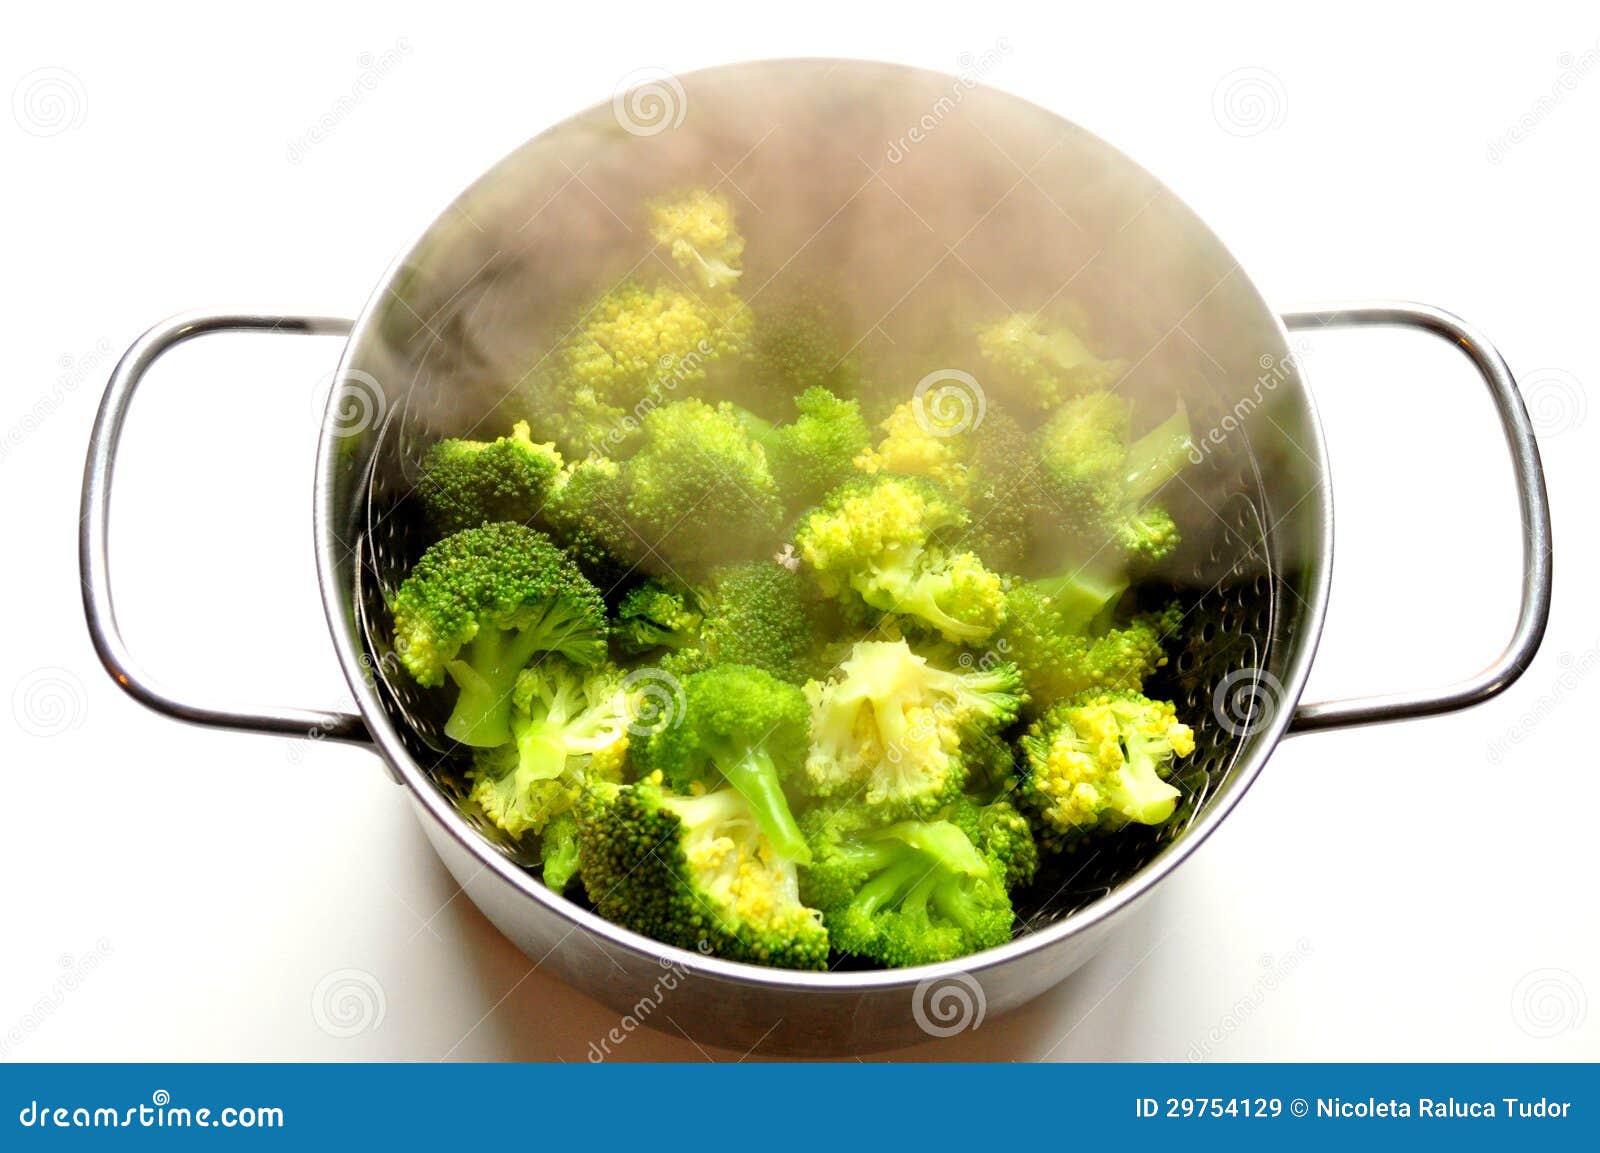 steaming broccoli in an inox pot